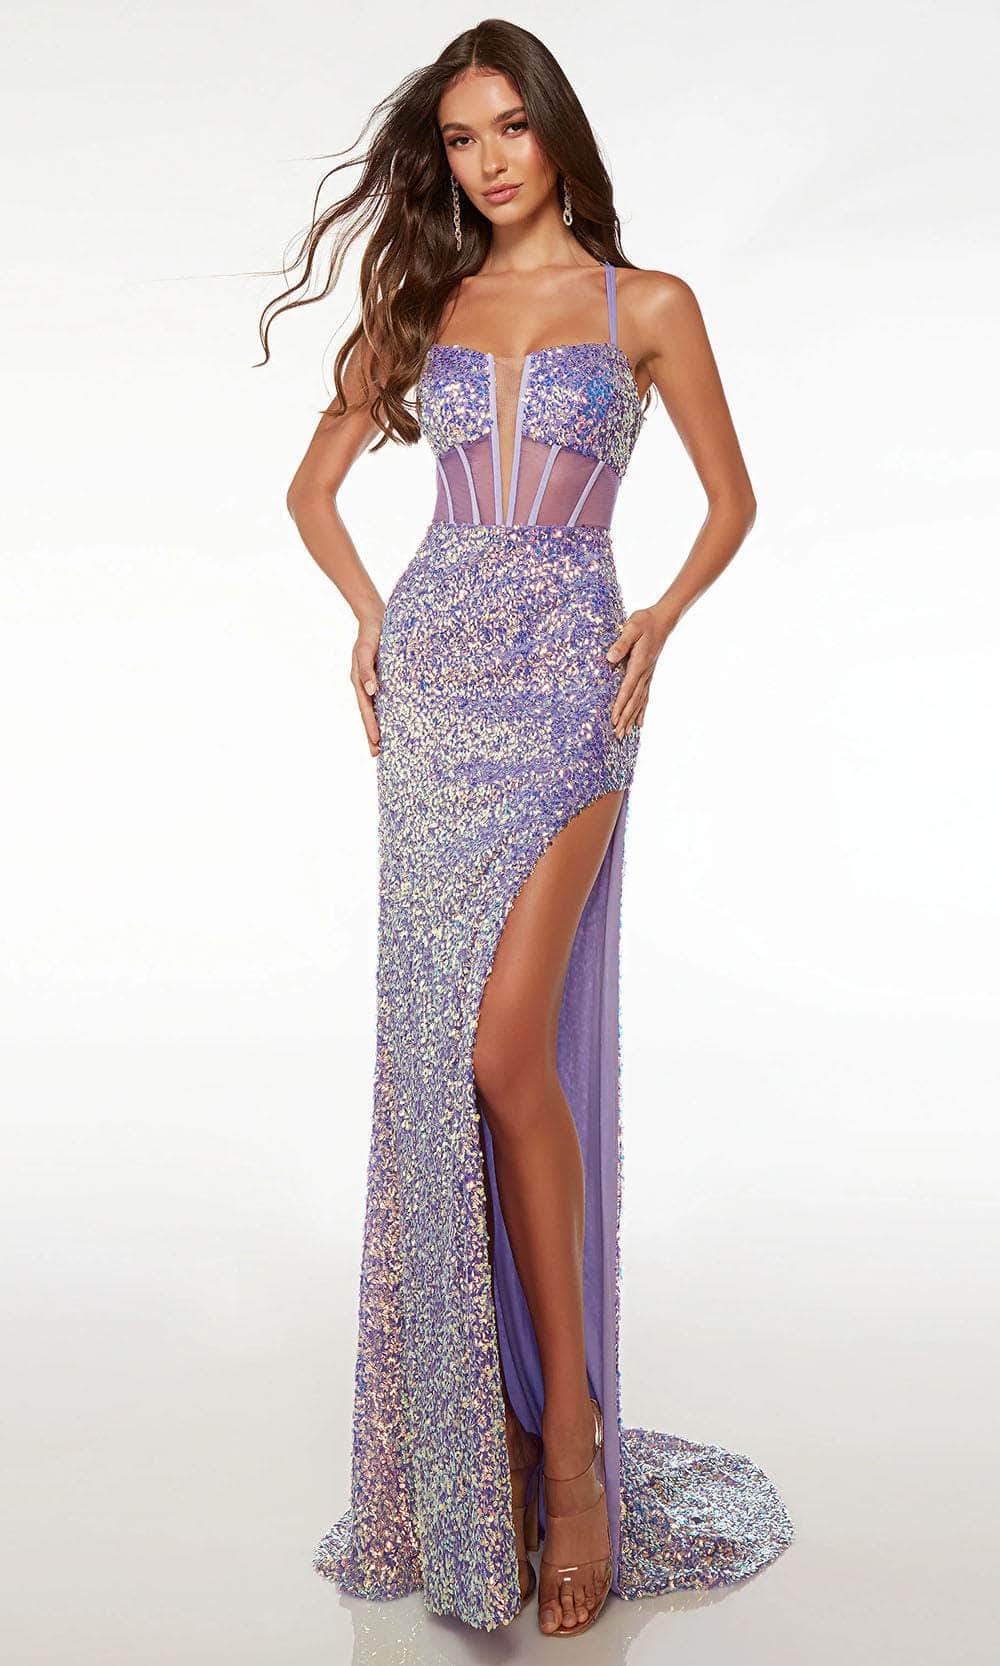 Image of Alyce Paris 61551 - V-Neck Sparkly Prom Gown with Slit